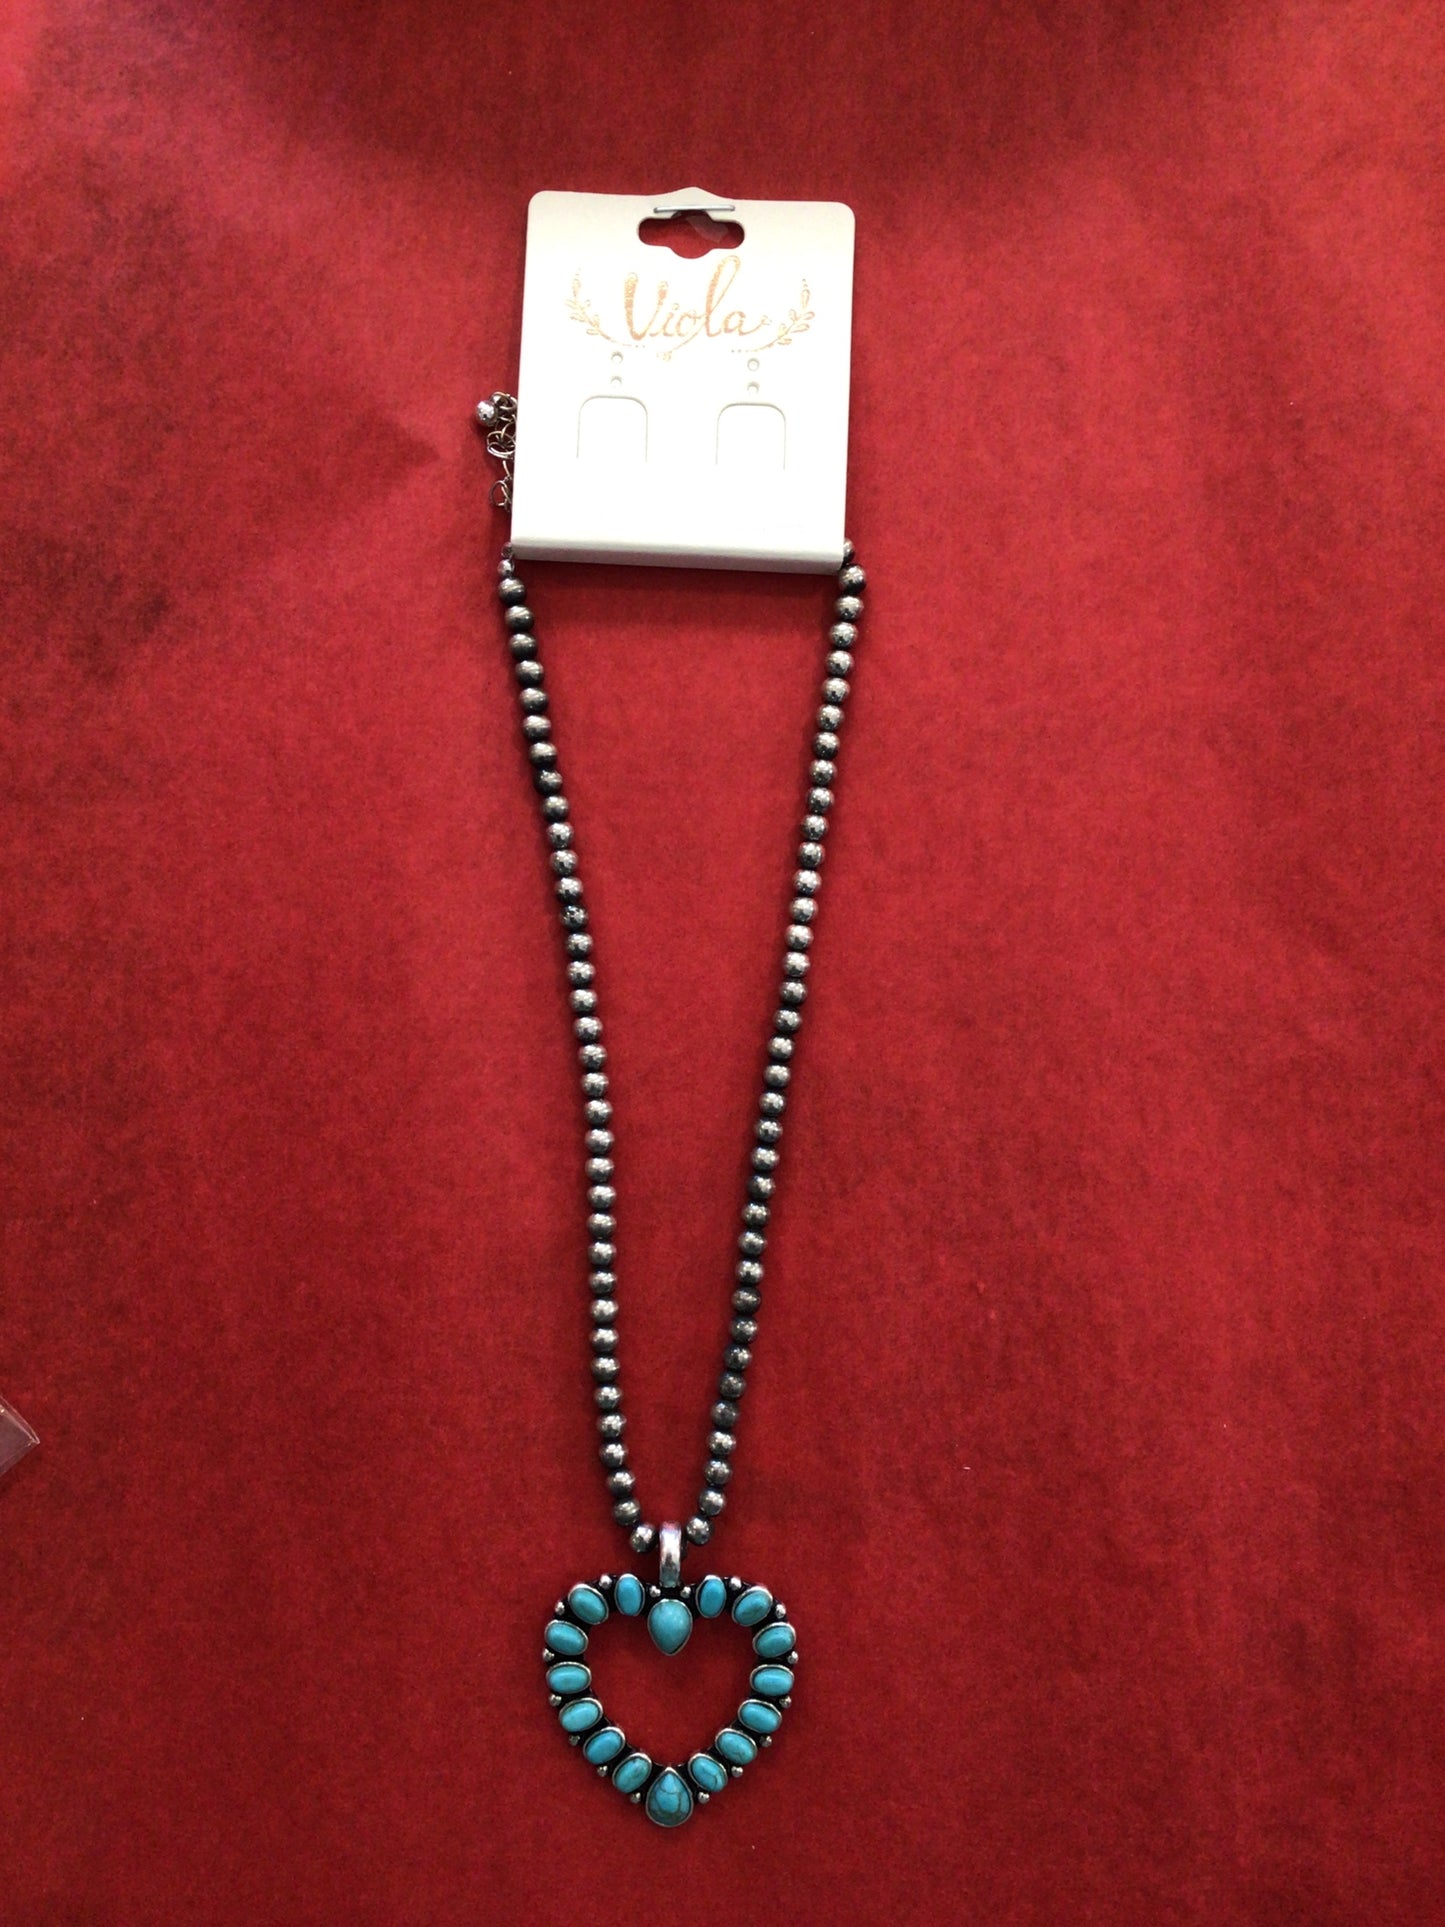 Silver/Turquoise Heart Shaped Necklace